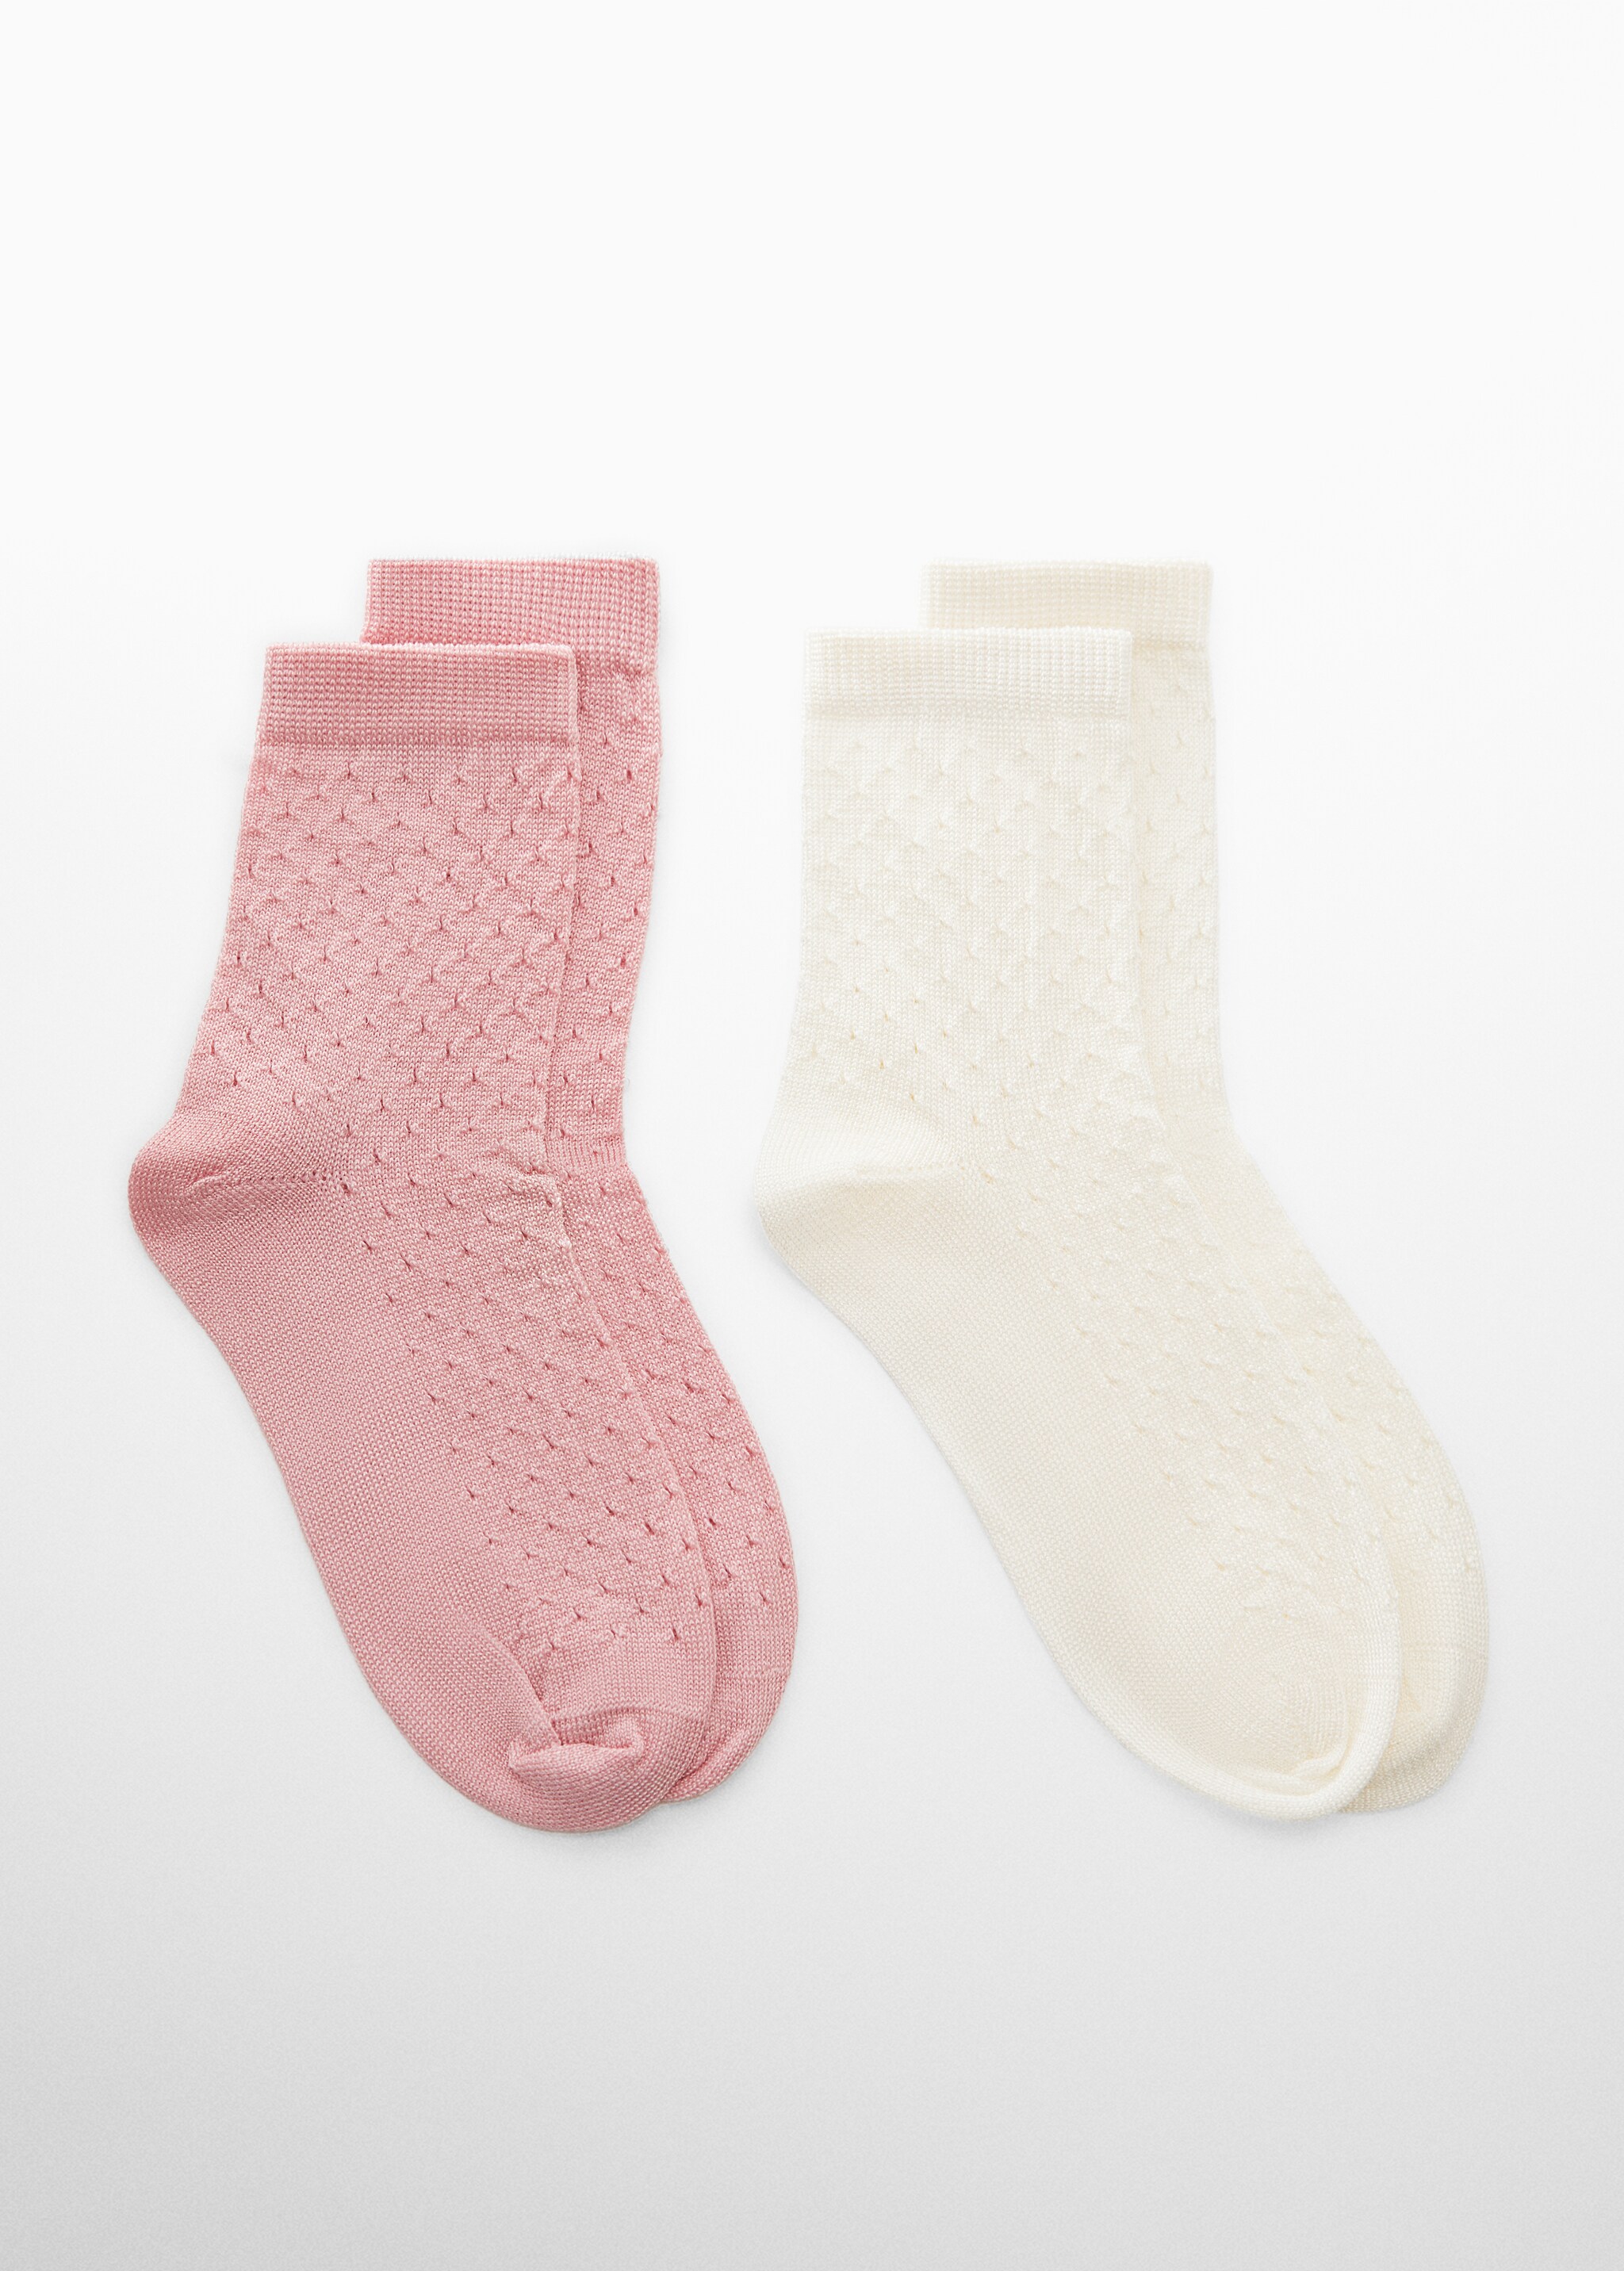 2 knit socks pack - Article without model